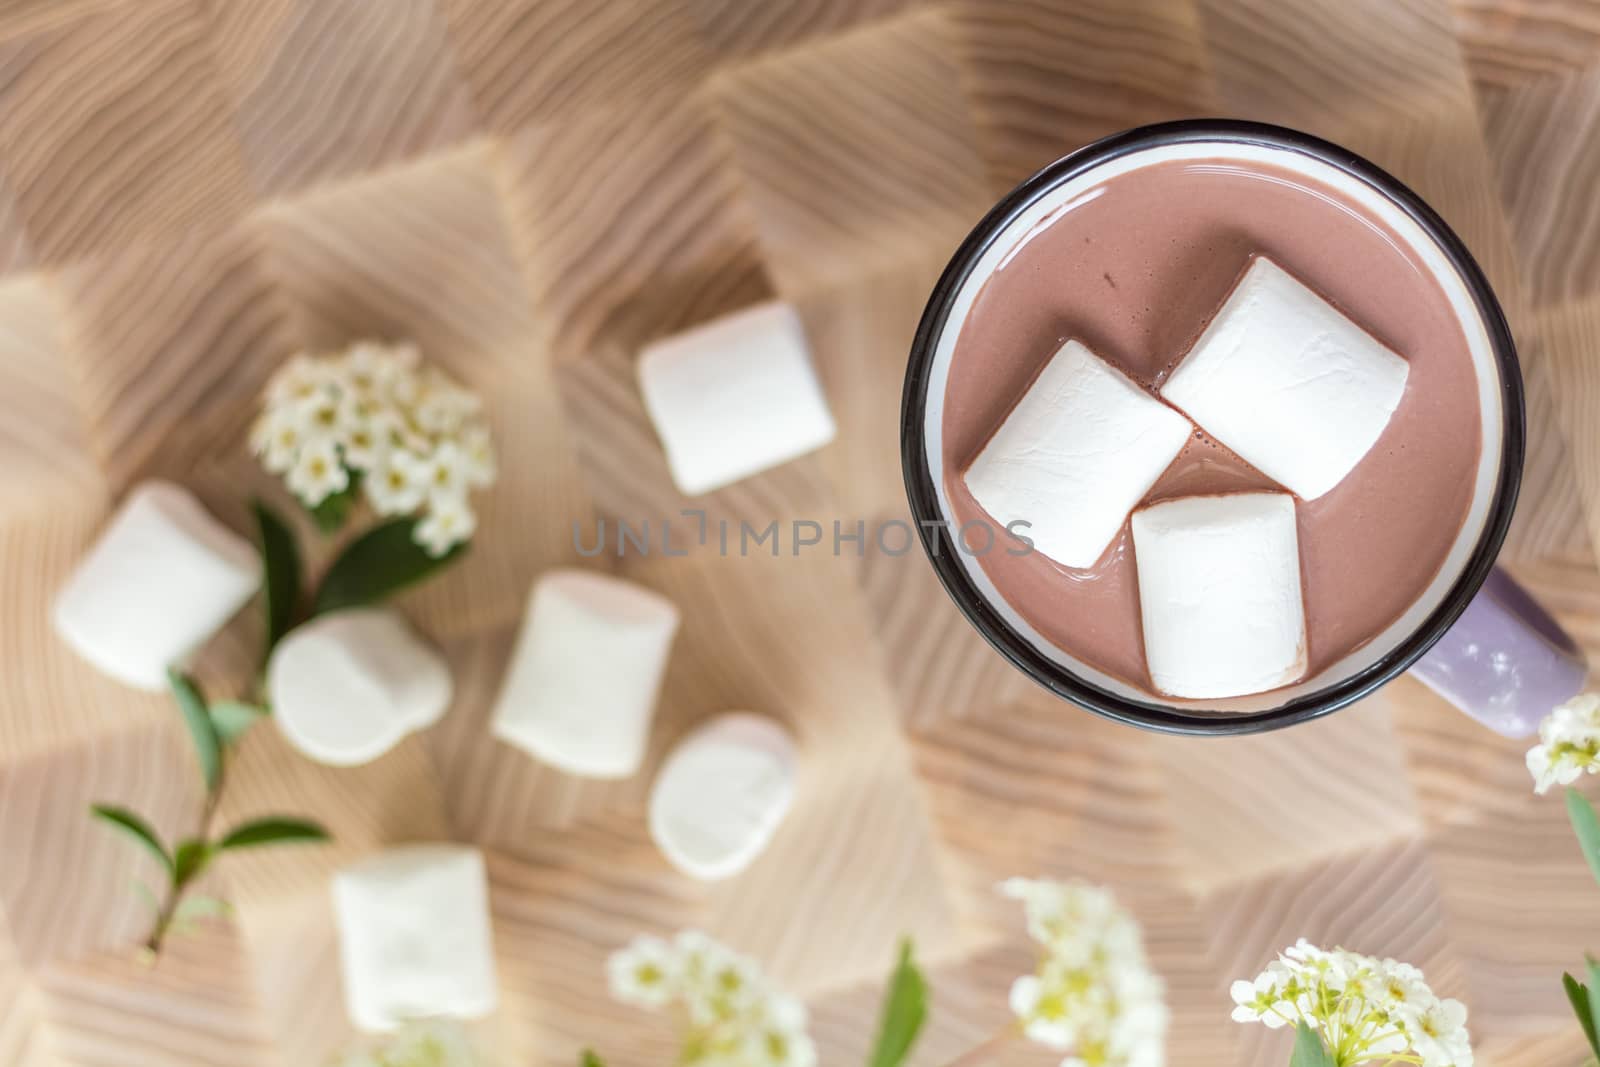  White marshmallows on top of hot cocoa in pink cup.  Fresh white spring flowers and more marshmallows are scattered around the cup. Cozy home concept. The view from above